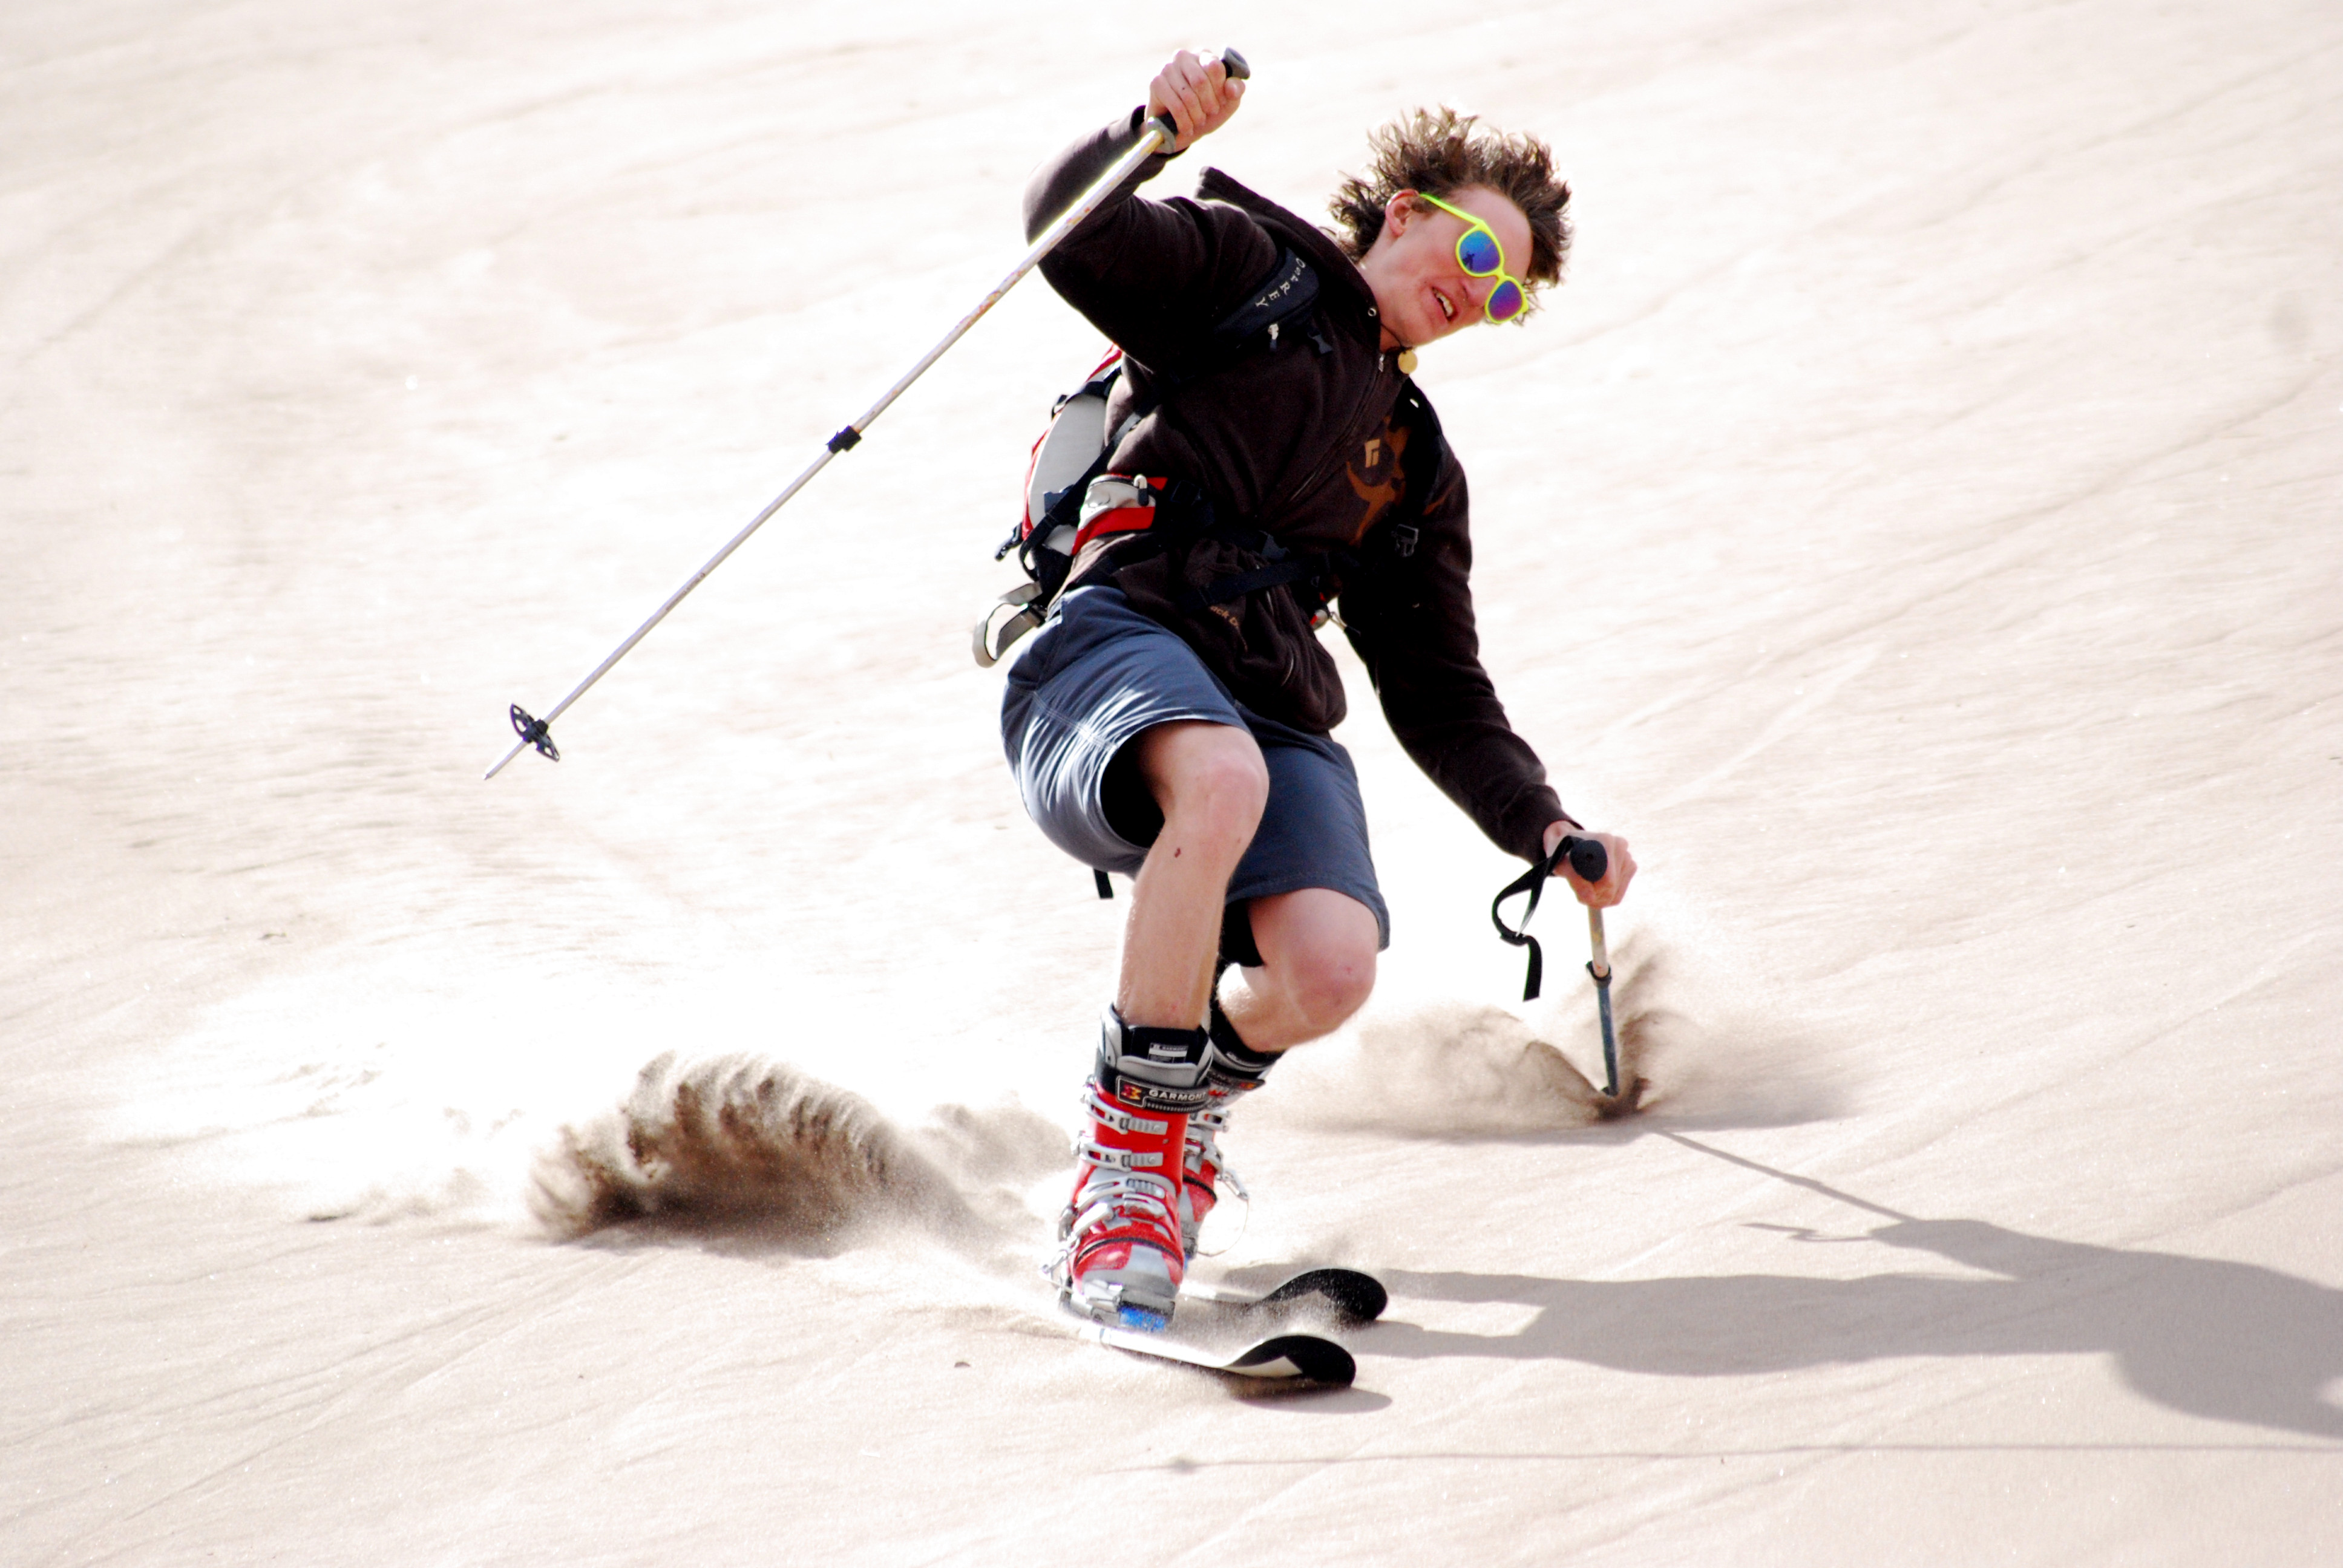 Kennedy telemark skiing in Great Sand Dunes National Park as a teenager. [Photo] Luke Lubchenco